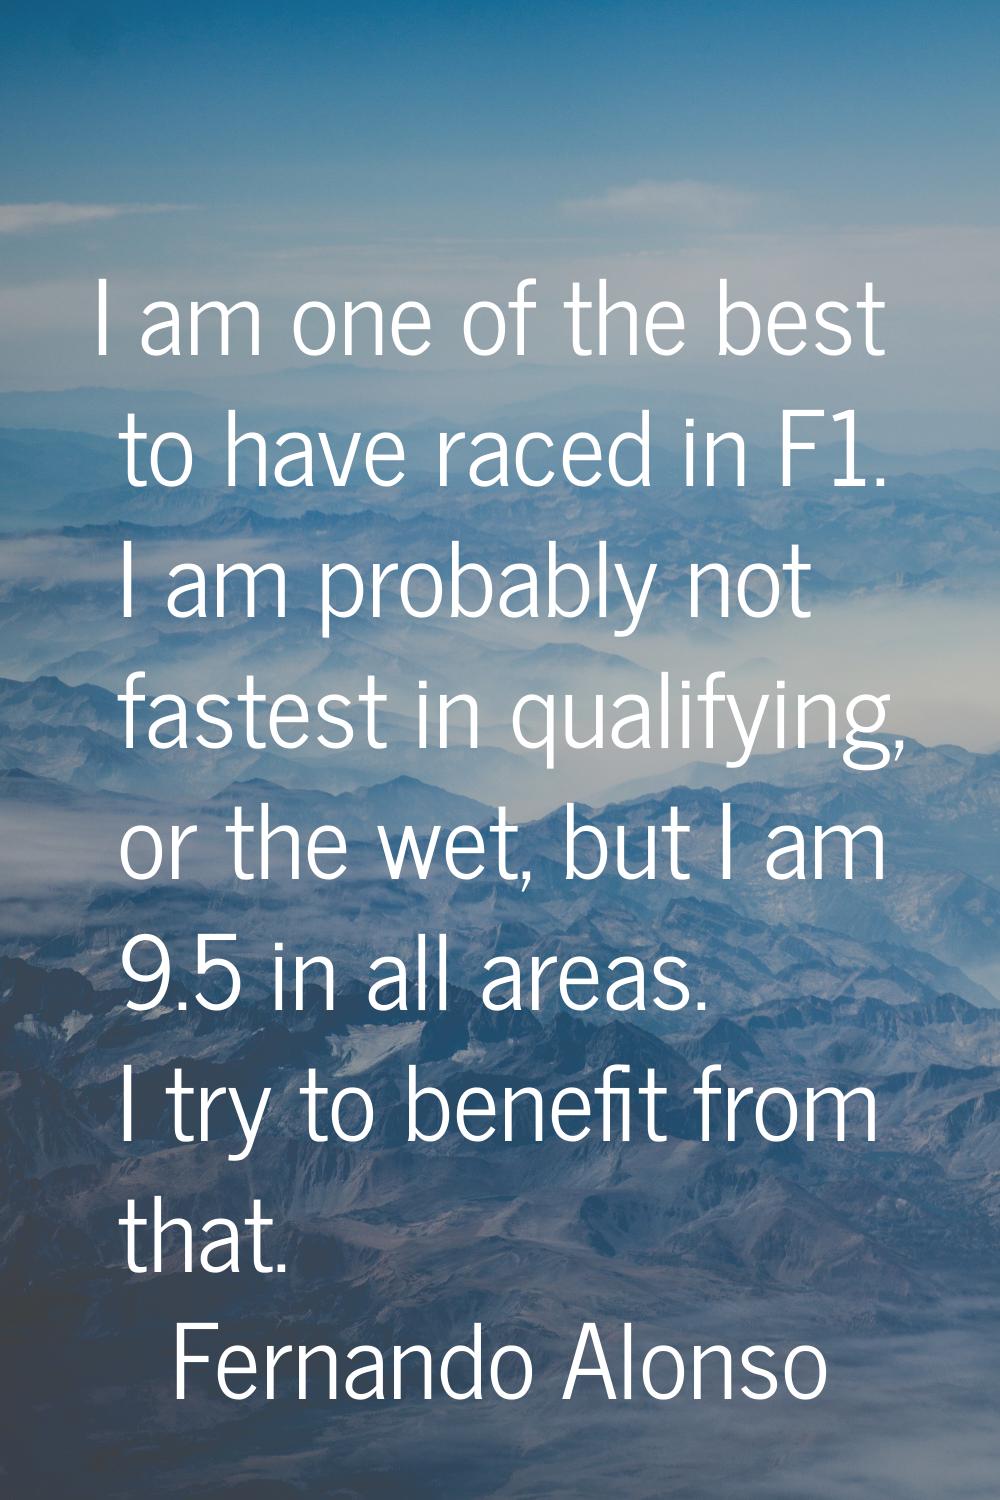 I am one of the best to have raced in F1. I am probably not fastest in qualifying, or the wet, but 